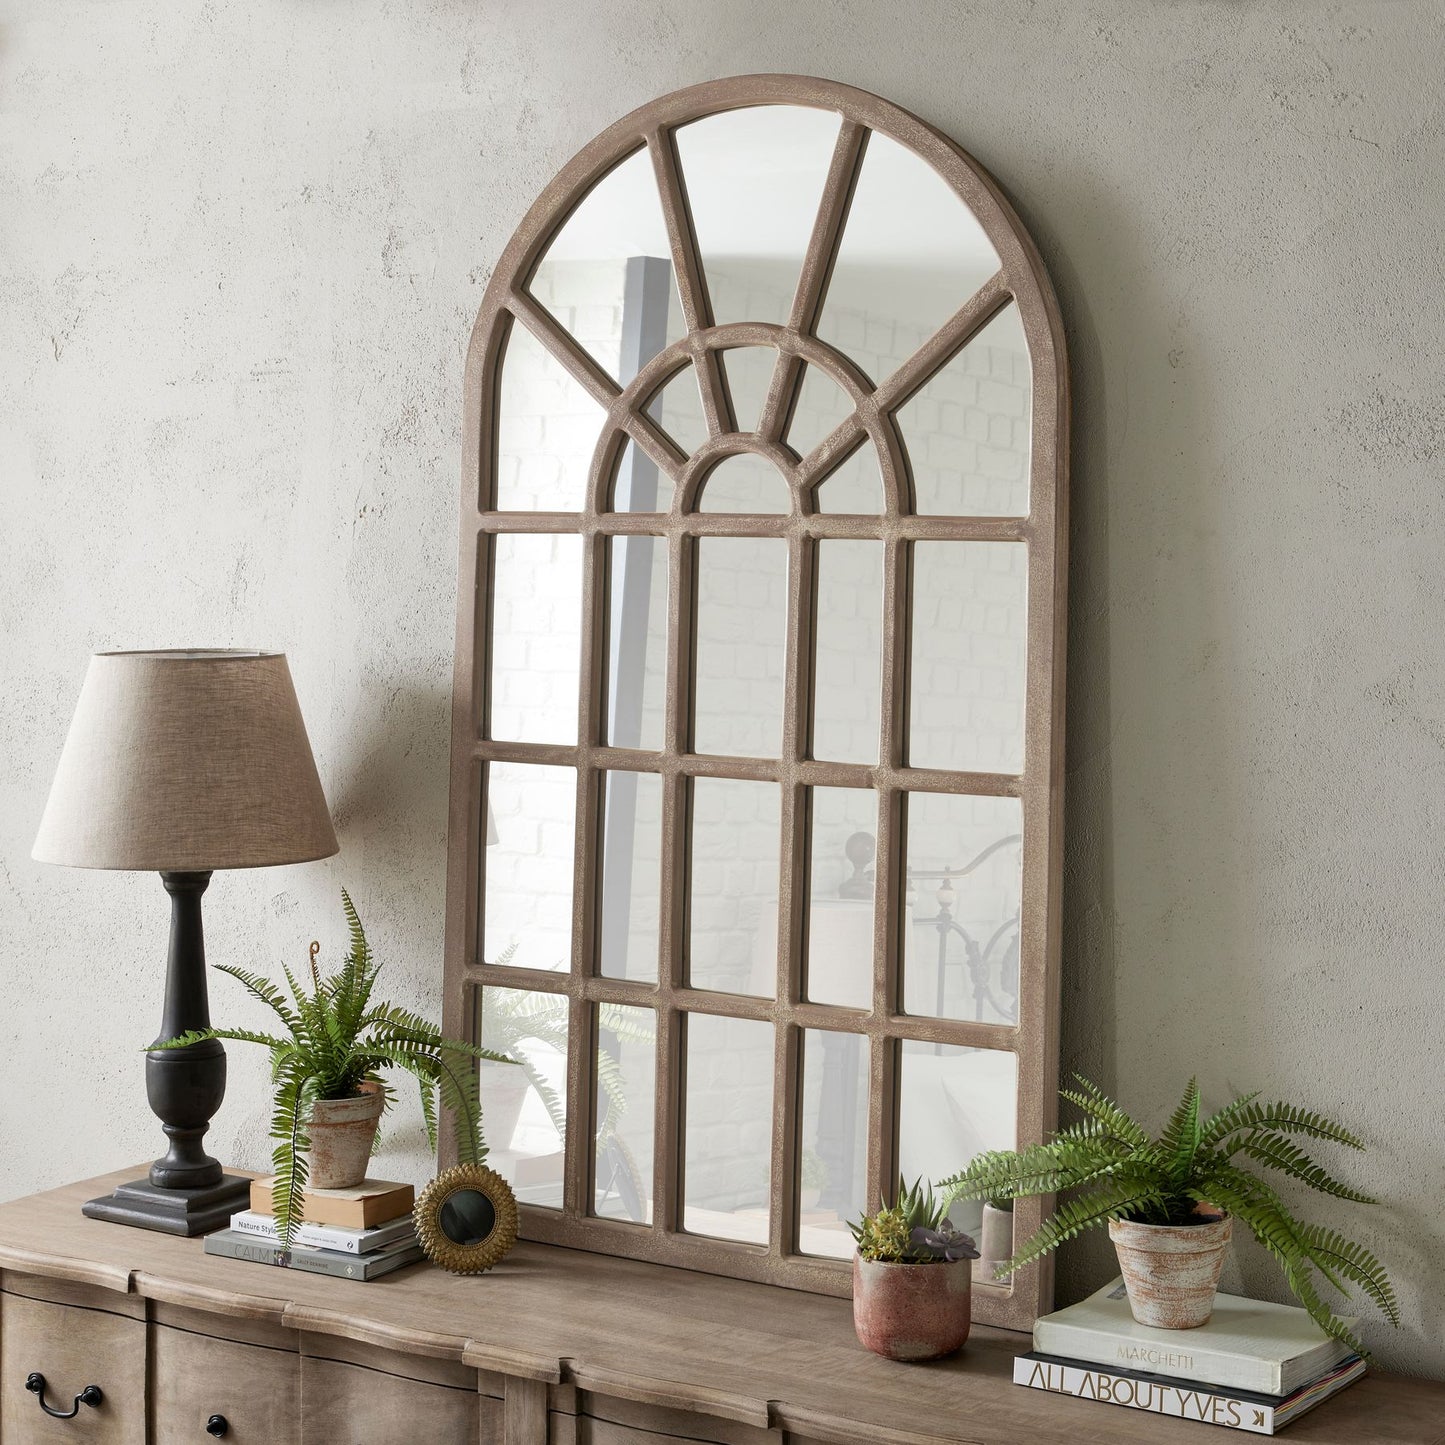 Copgrove Arched Paned Wall Mirror